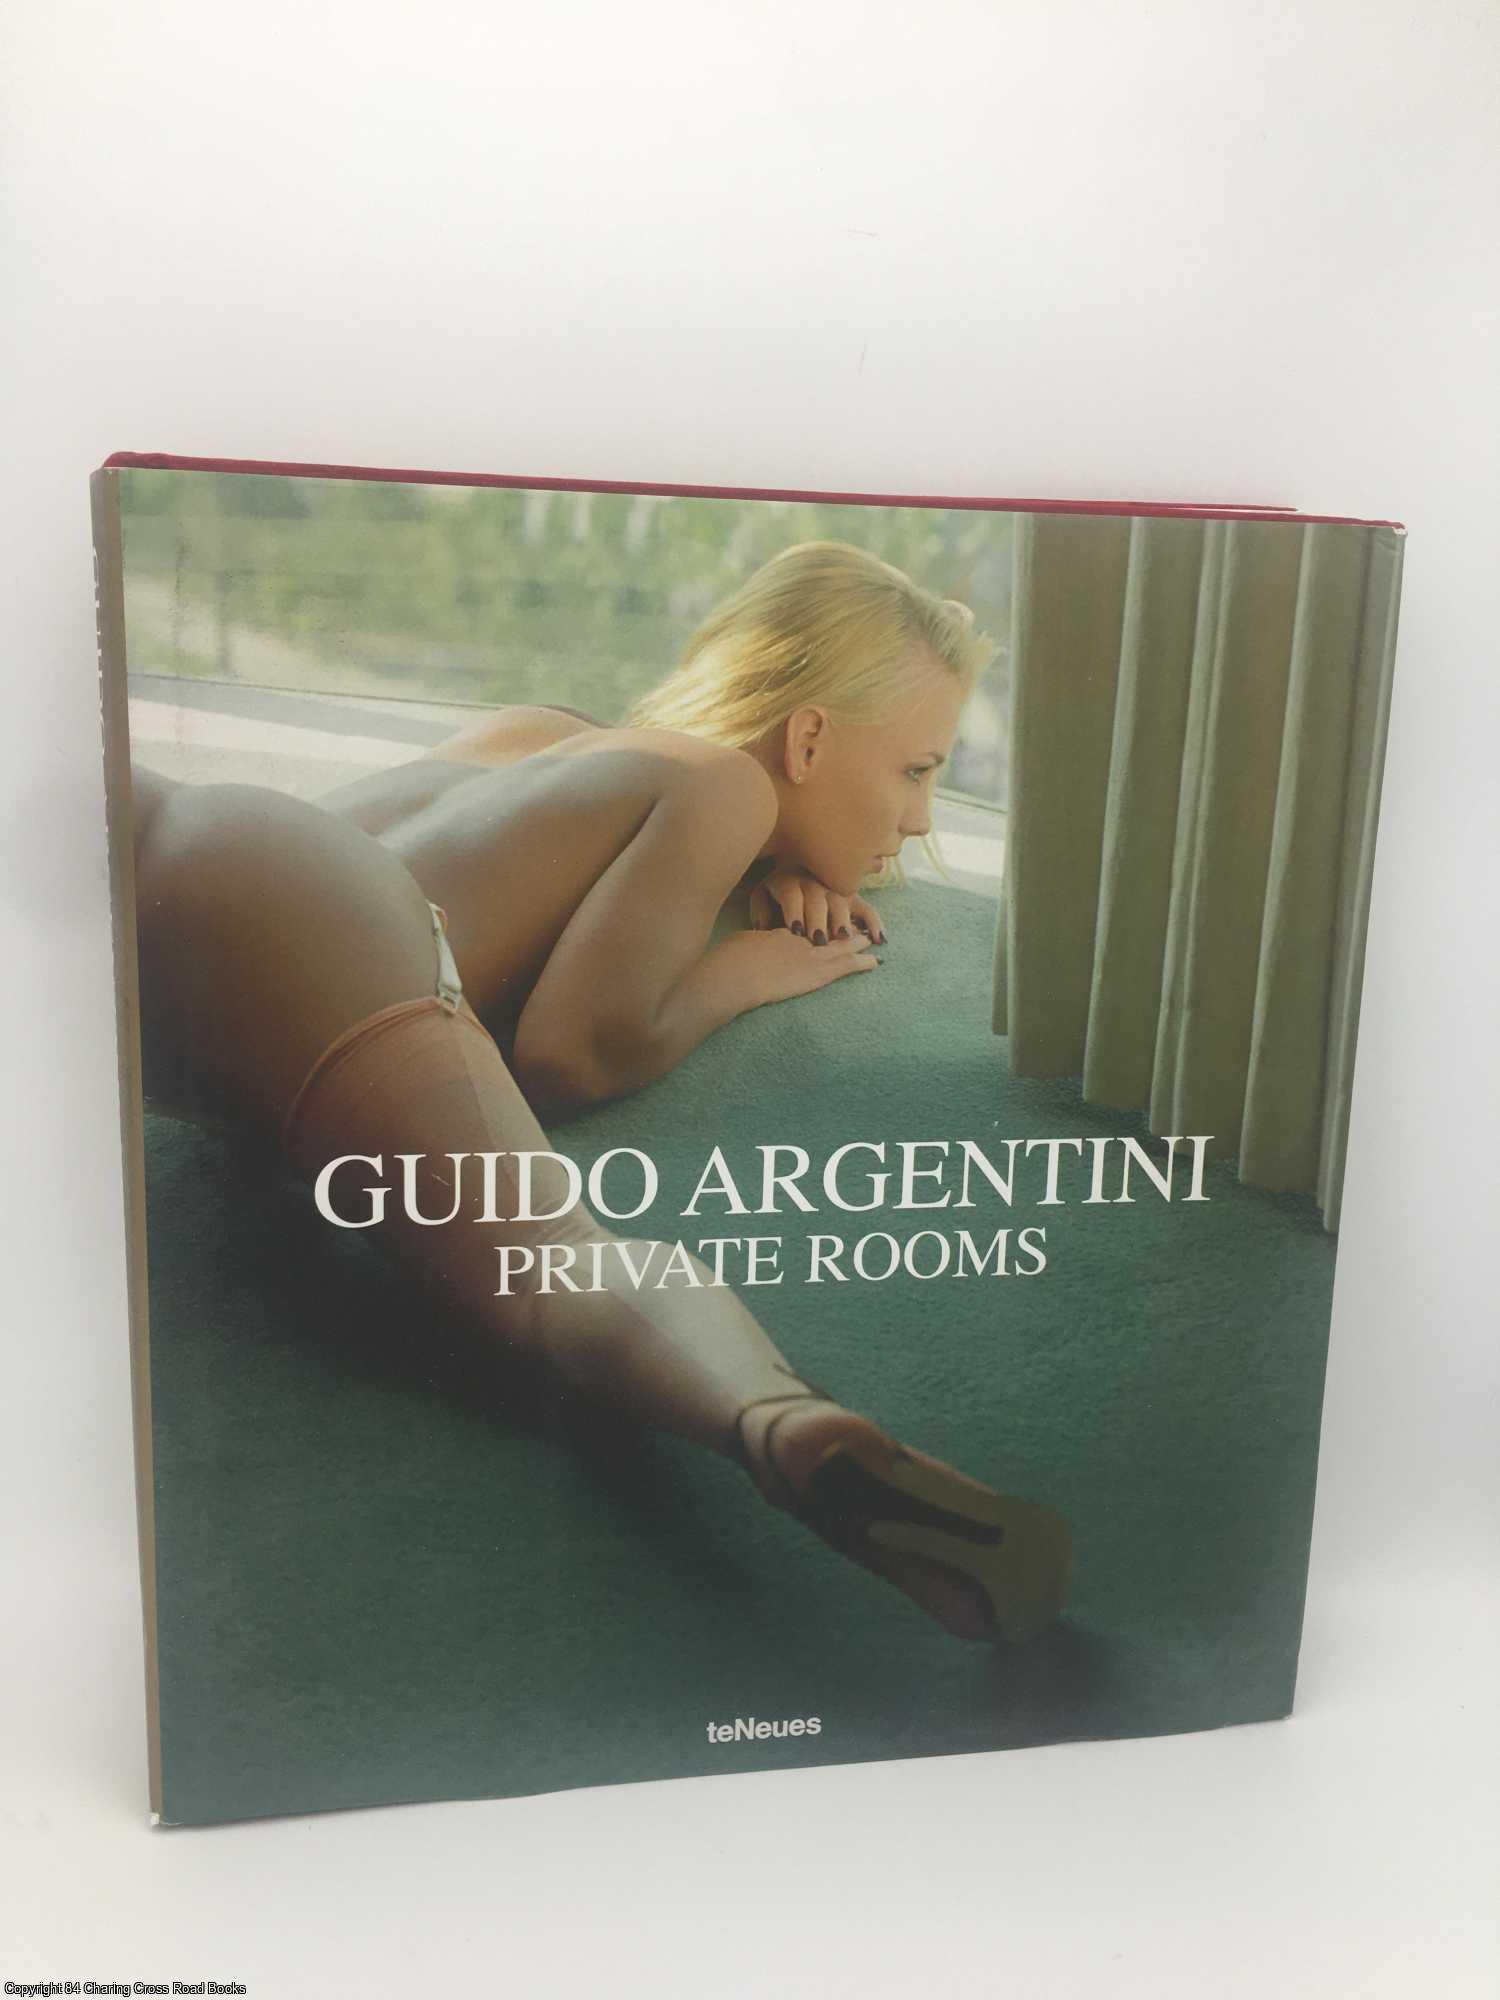 Private Rooms by Guido Argentini on 84 Charing Cross Rare Books